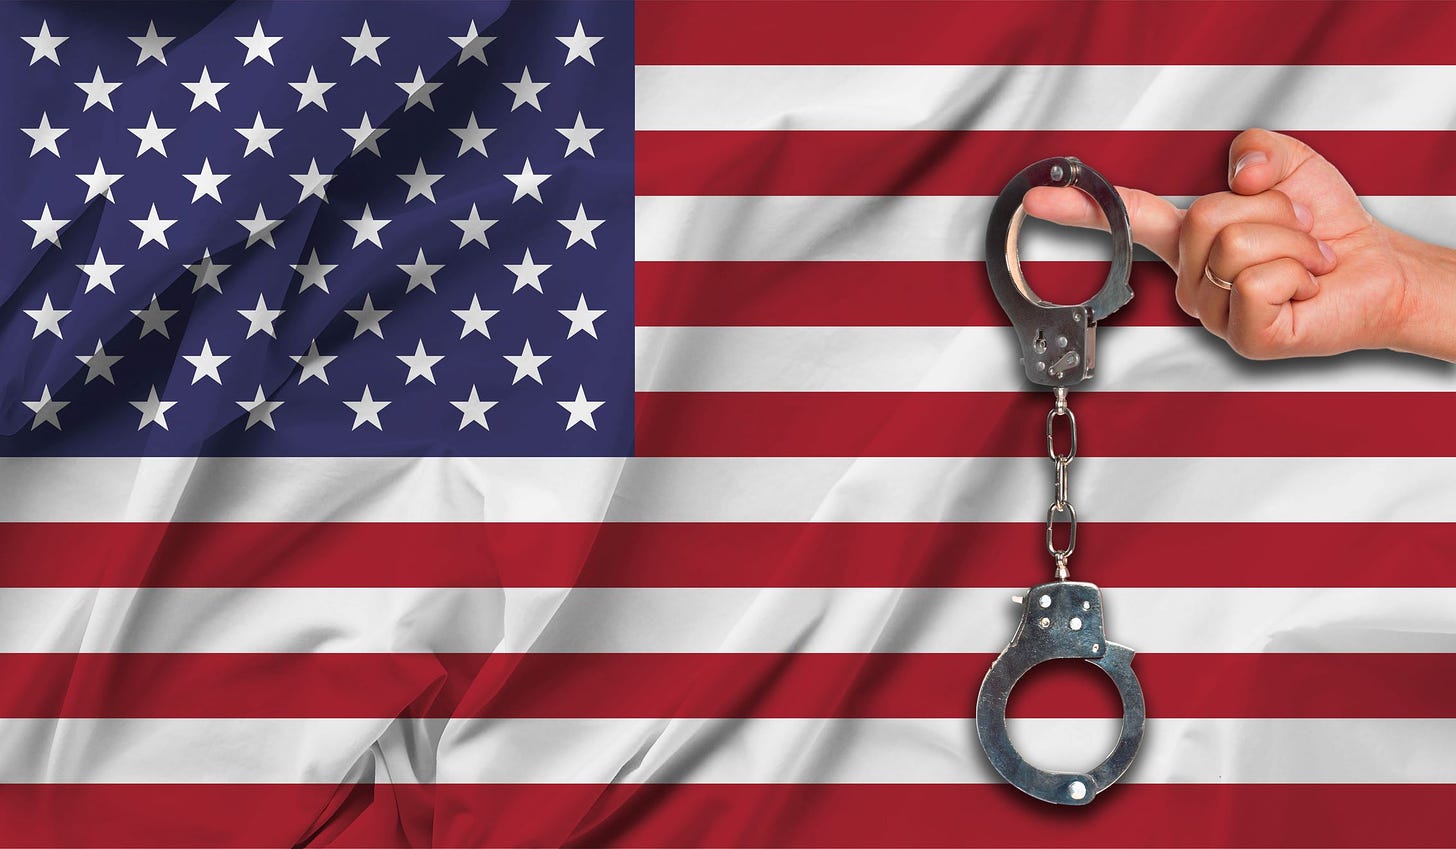 Photo of an American flag with a hand in front of it, holding a pair of handcuffs.